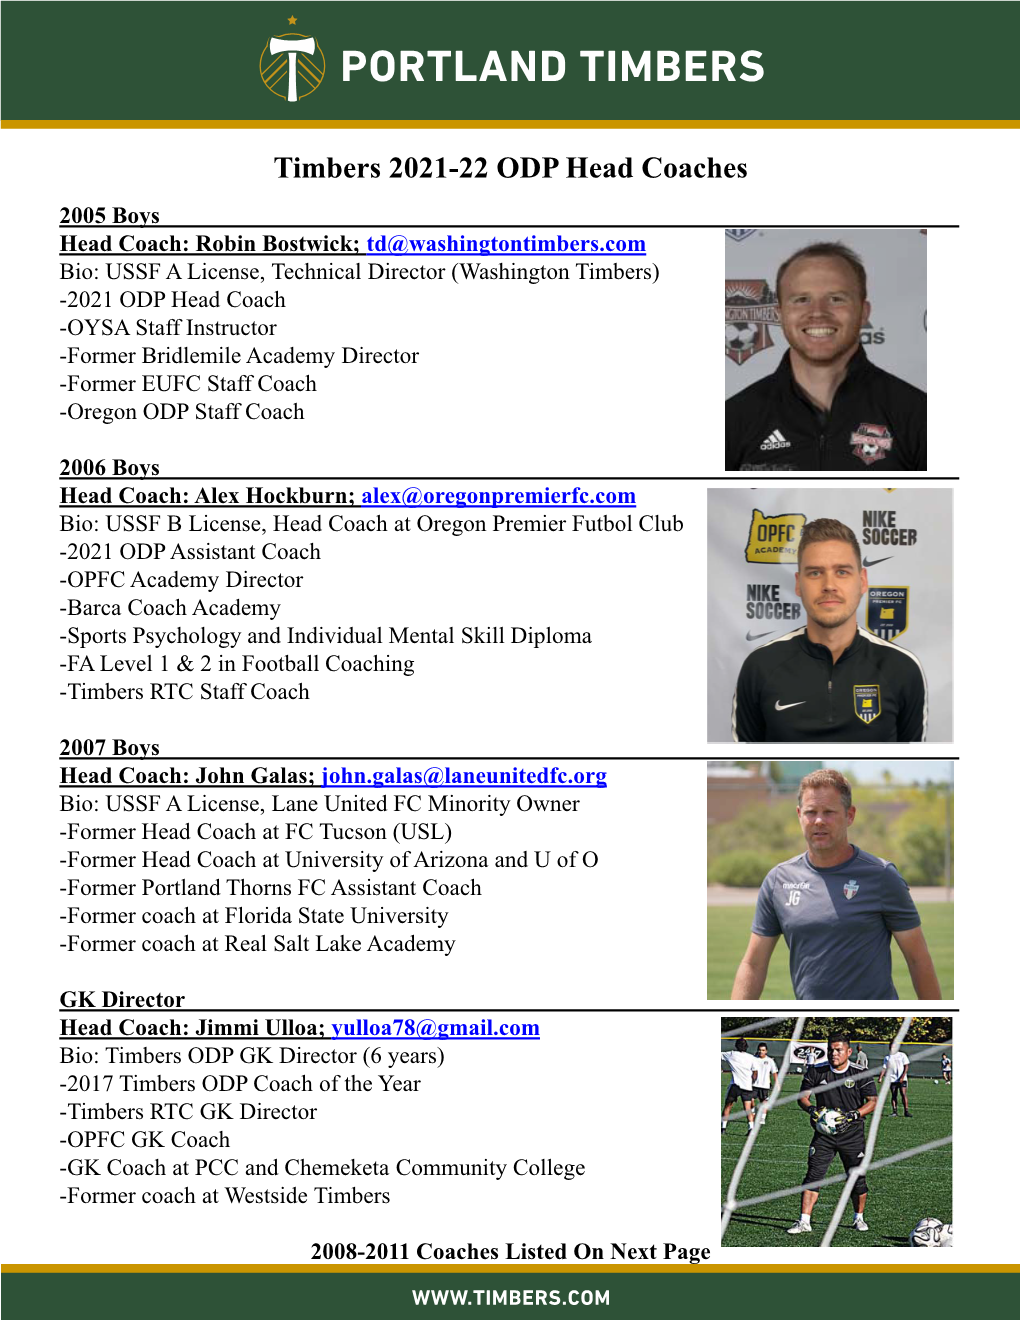 Timbers 2021-22 ODP Head Coaches